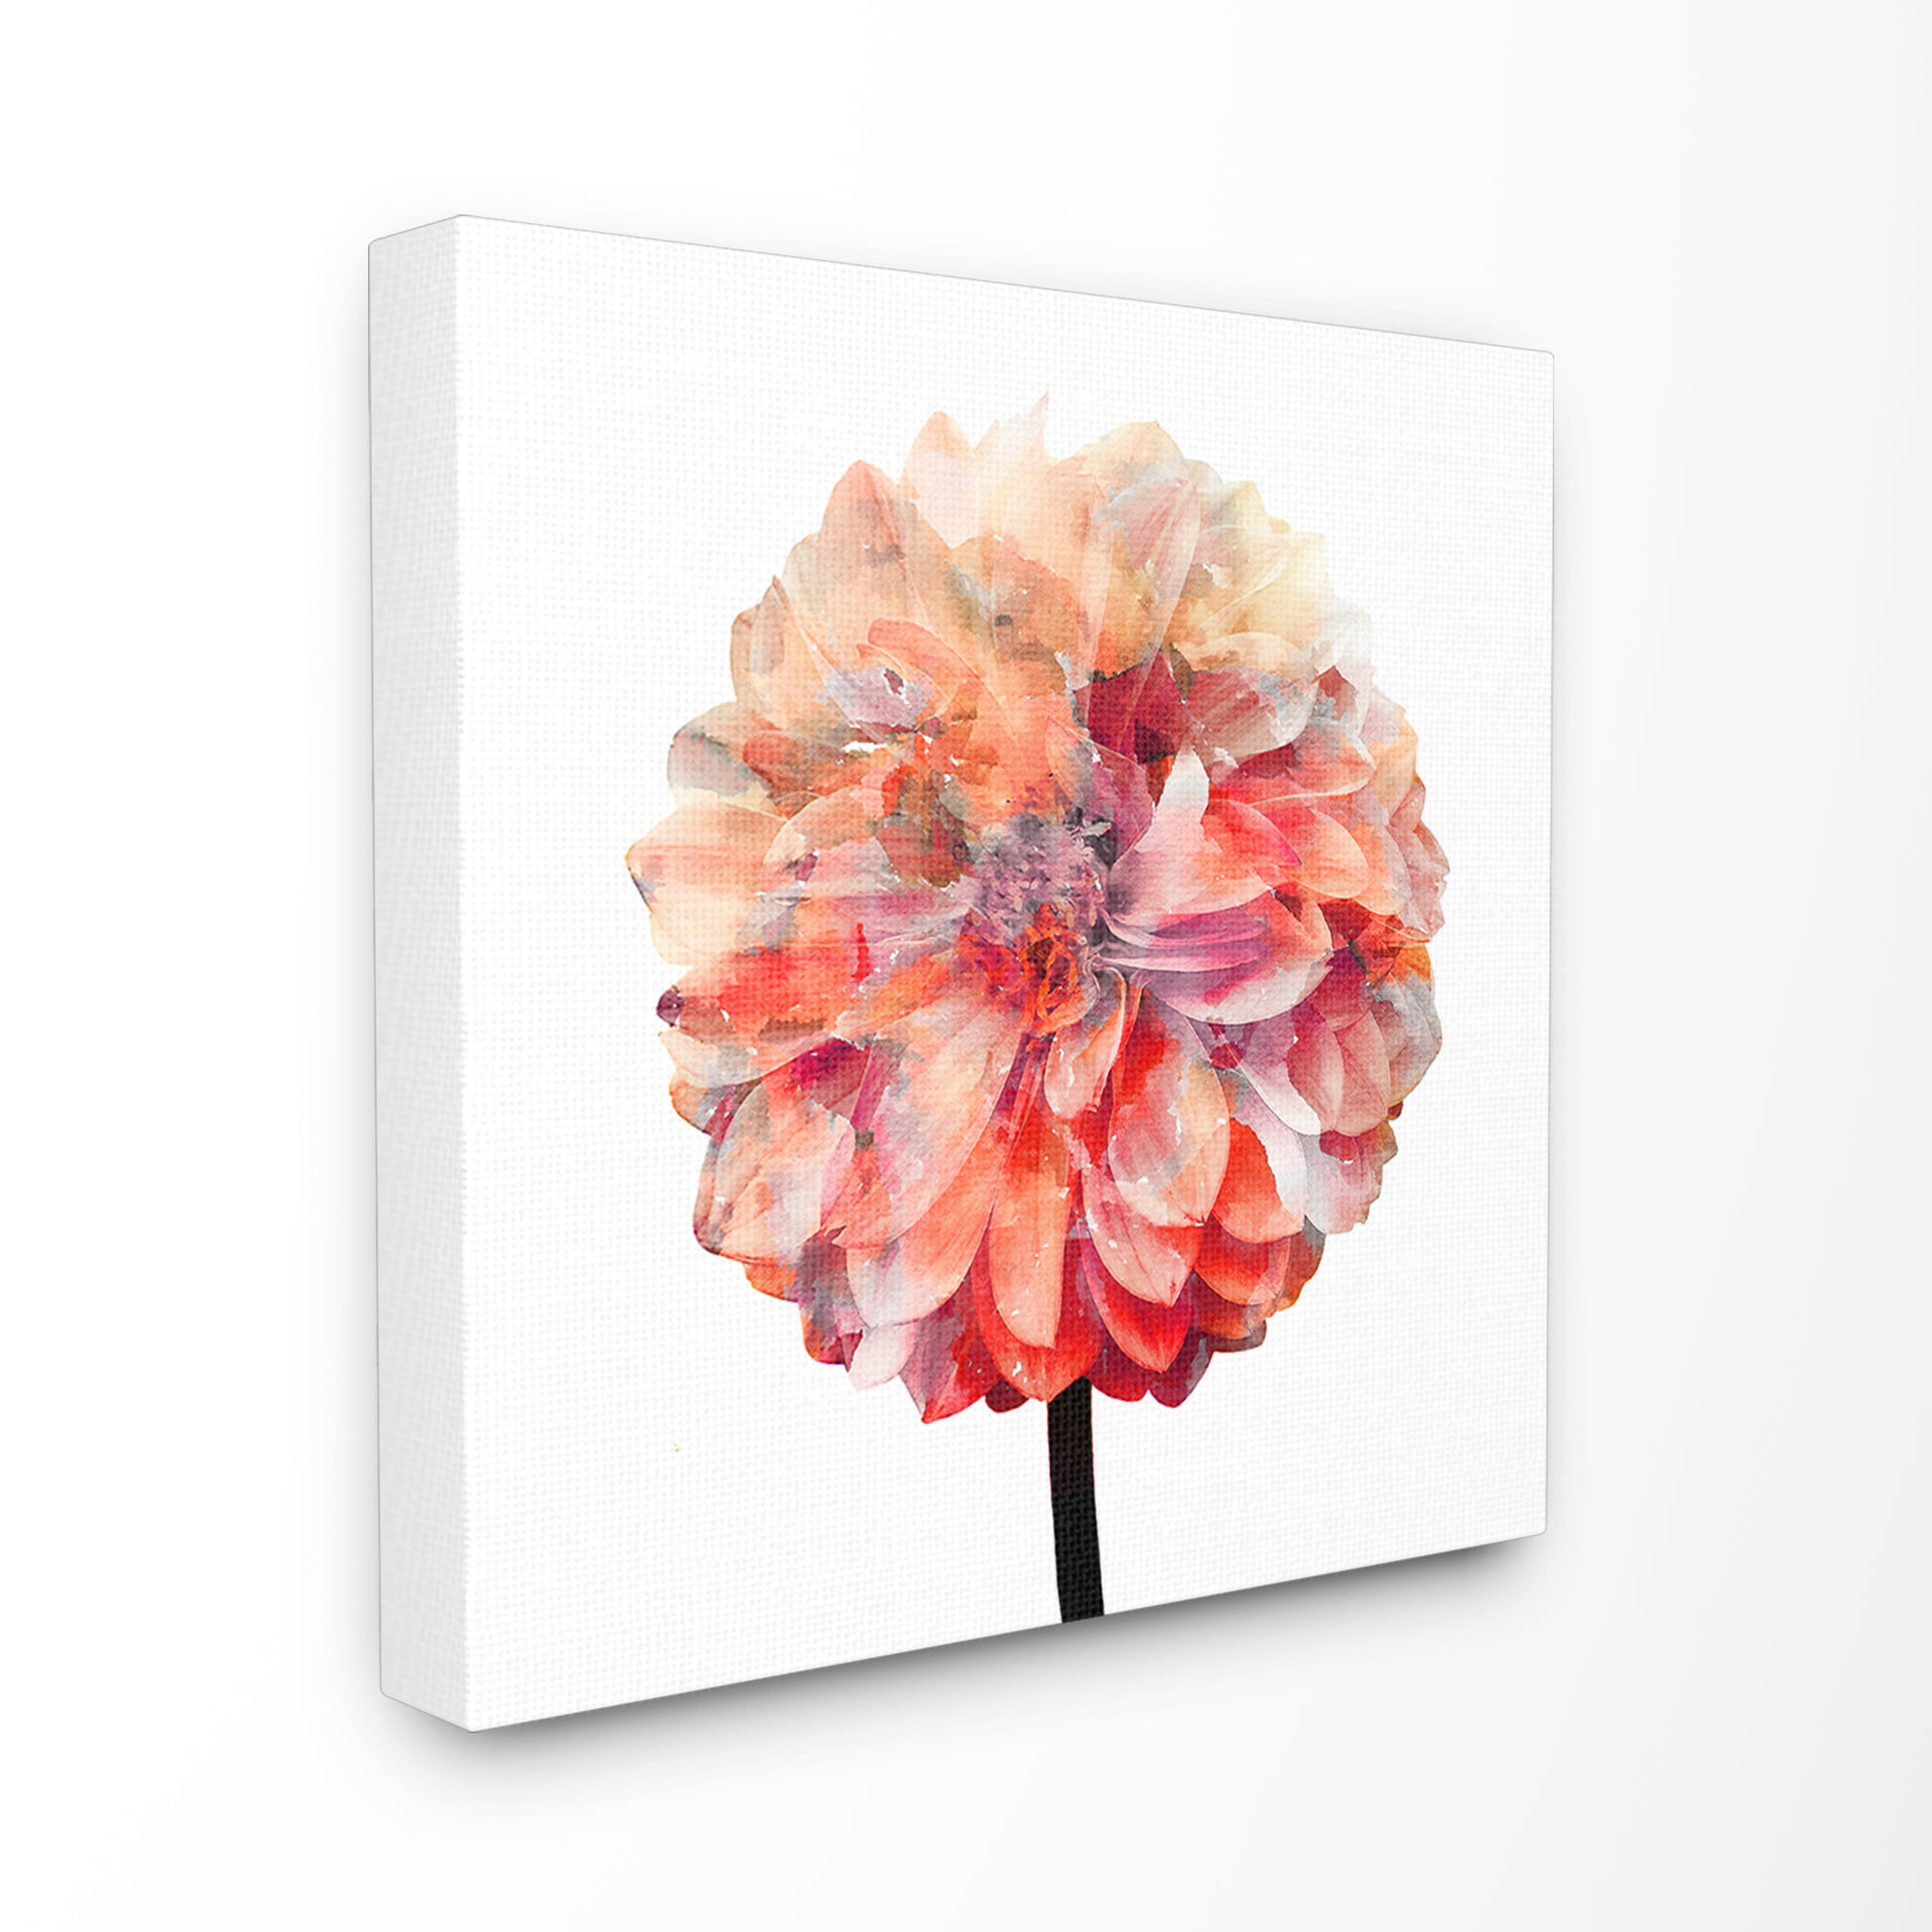 Coral Gray Bathroom Wall Art Picture Prints Decor Floral Peony Dahlia Quotes Art